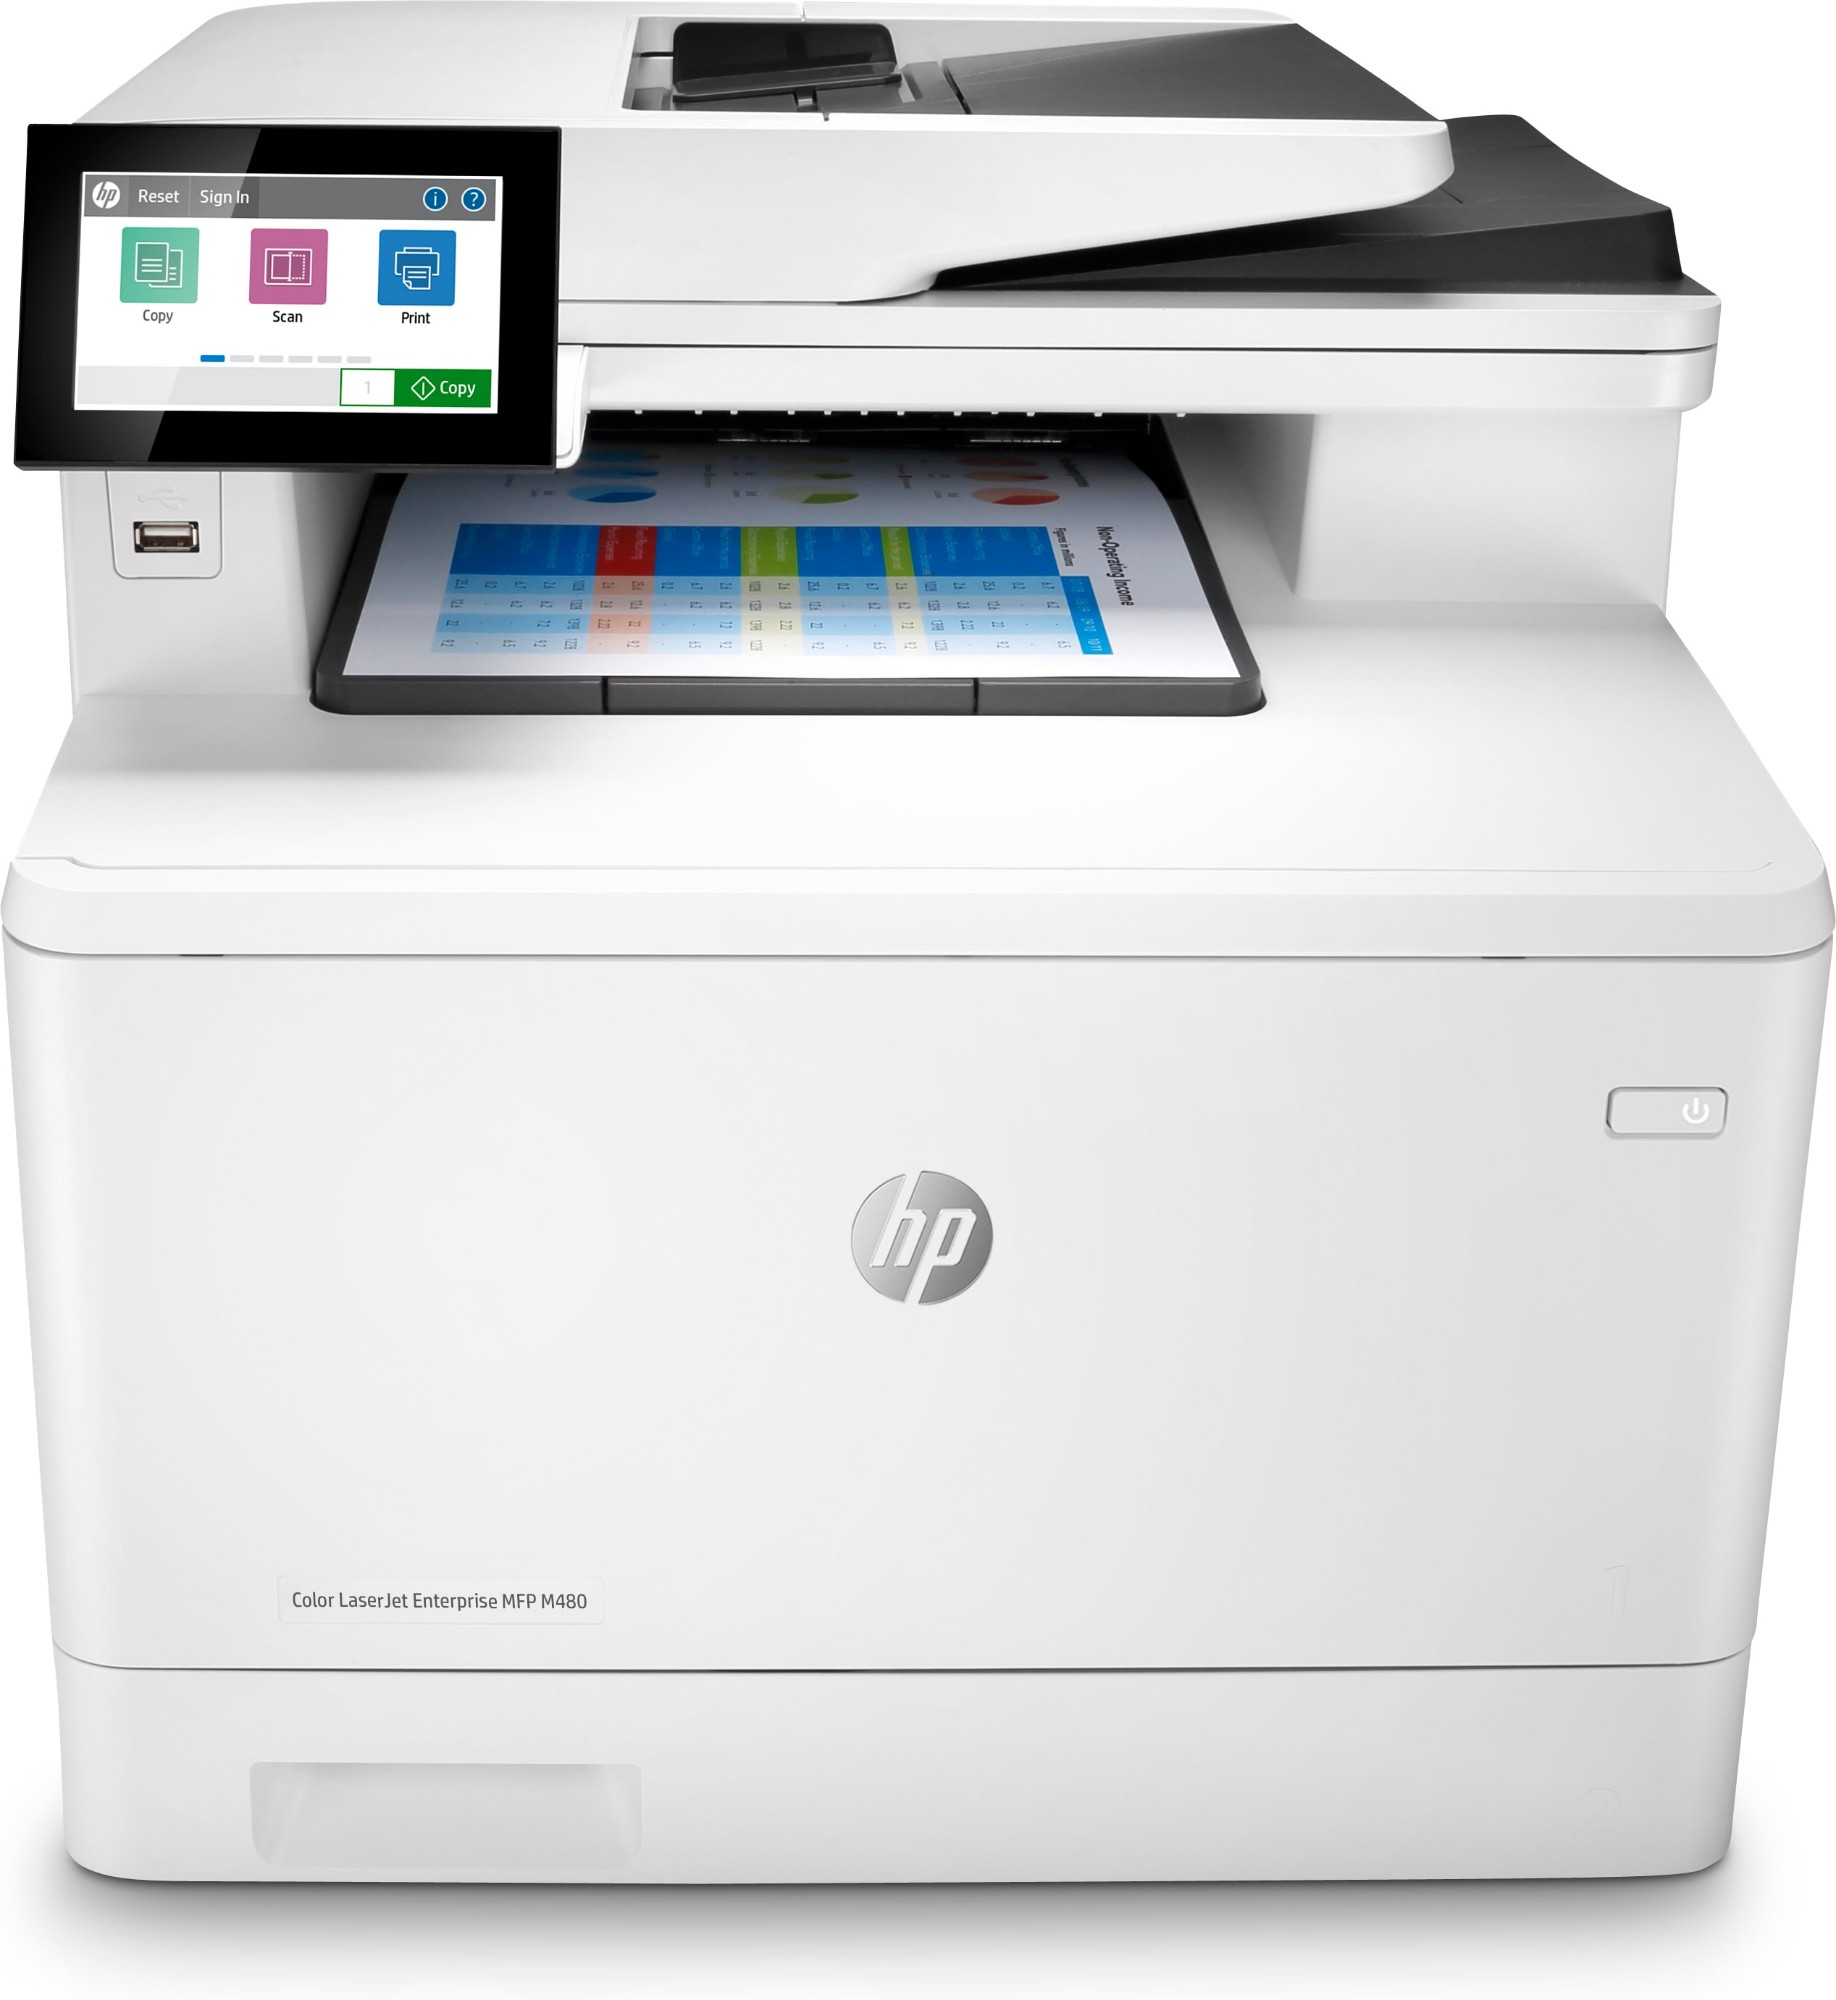 HP Colour LaserJet Enterprise MFP M480f, Colour, Printer for Business, Print, copy, scan, fax, Compact Size; Strong Security; Two-sided printing; 50-sheet ADF; Energy Efficient